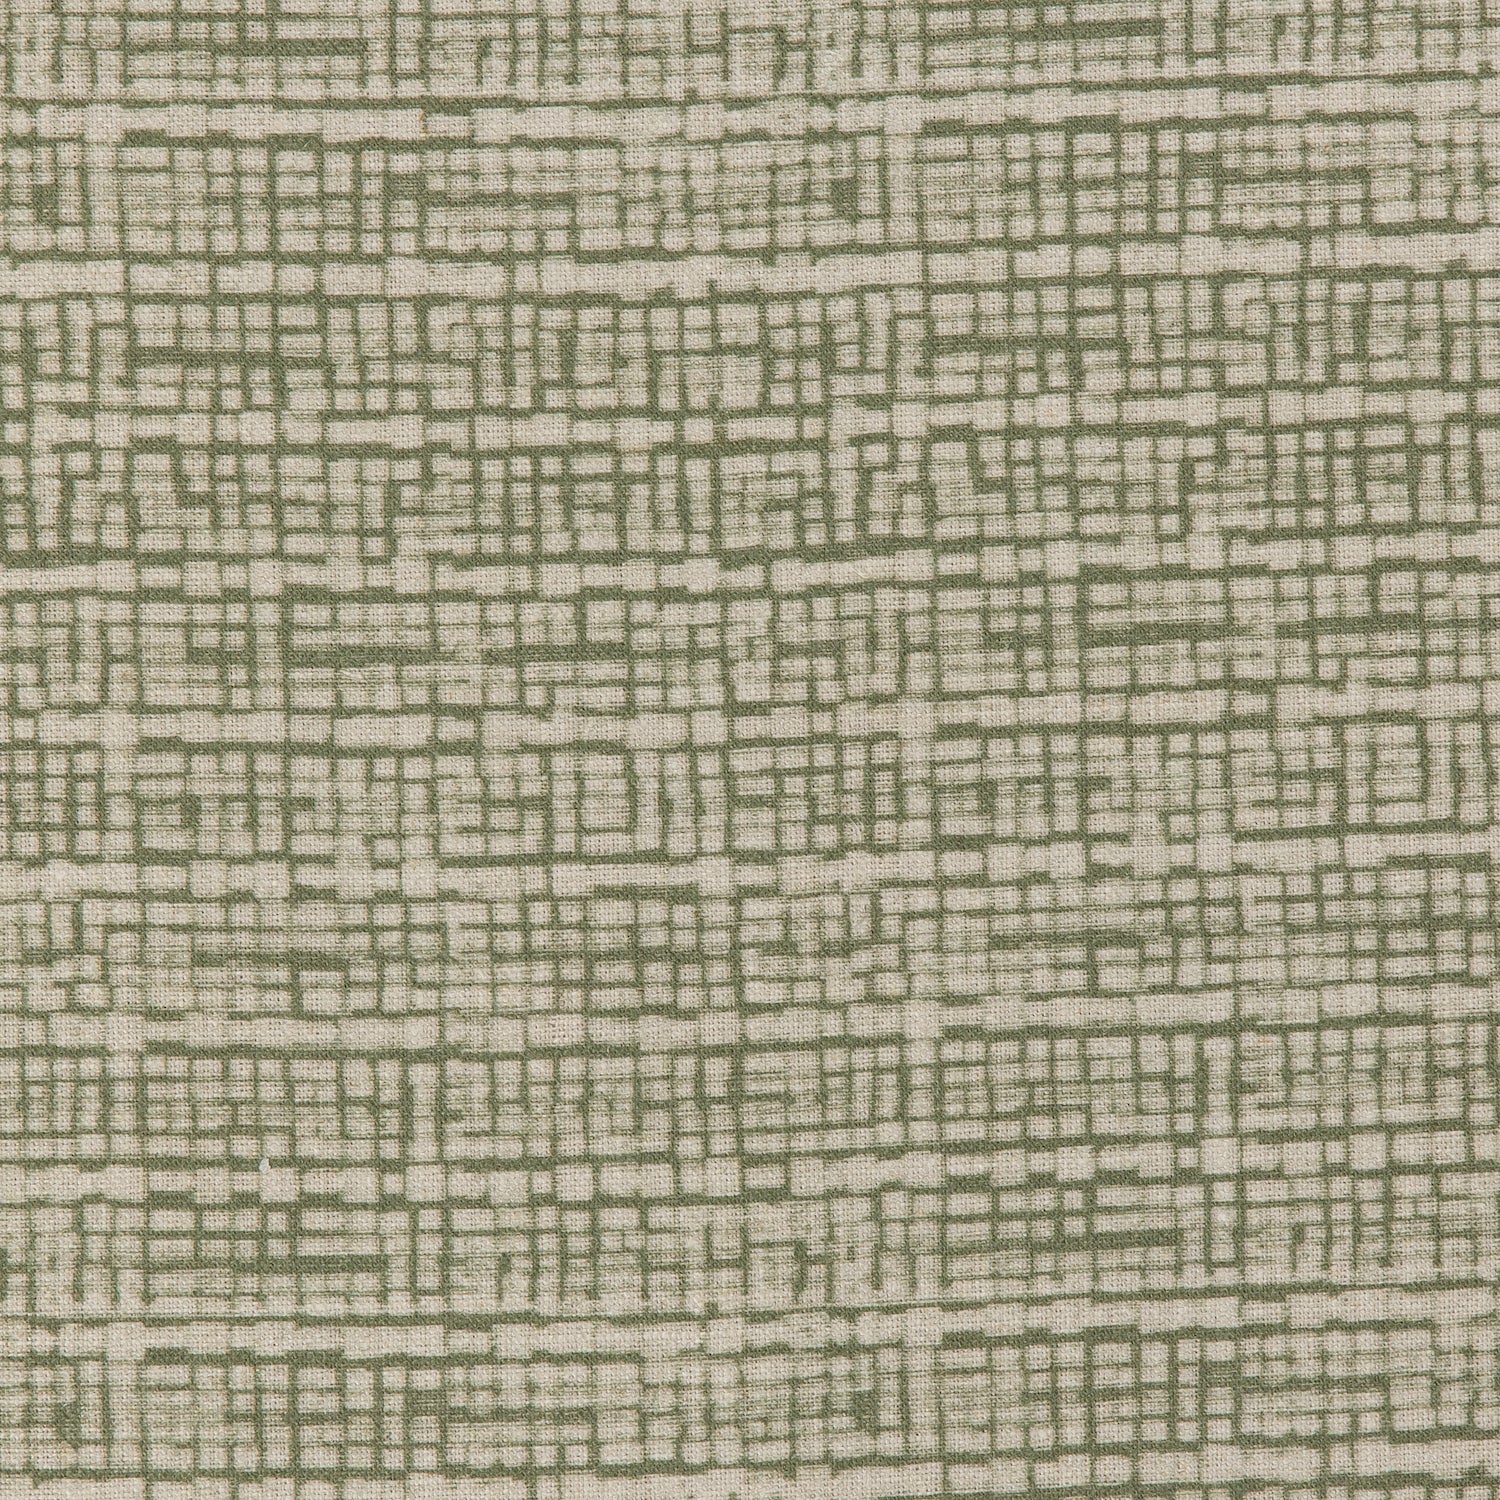 Detail of a linen fabric in a repeating abstract gridded pattern in sage on a cream field.